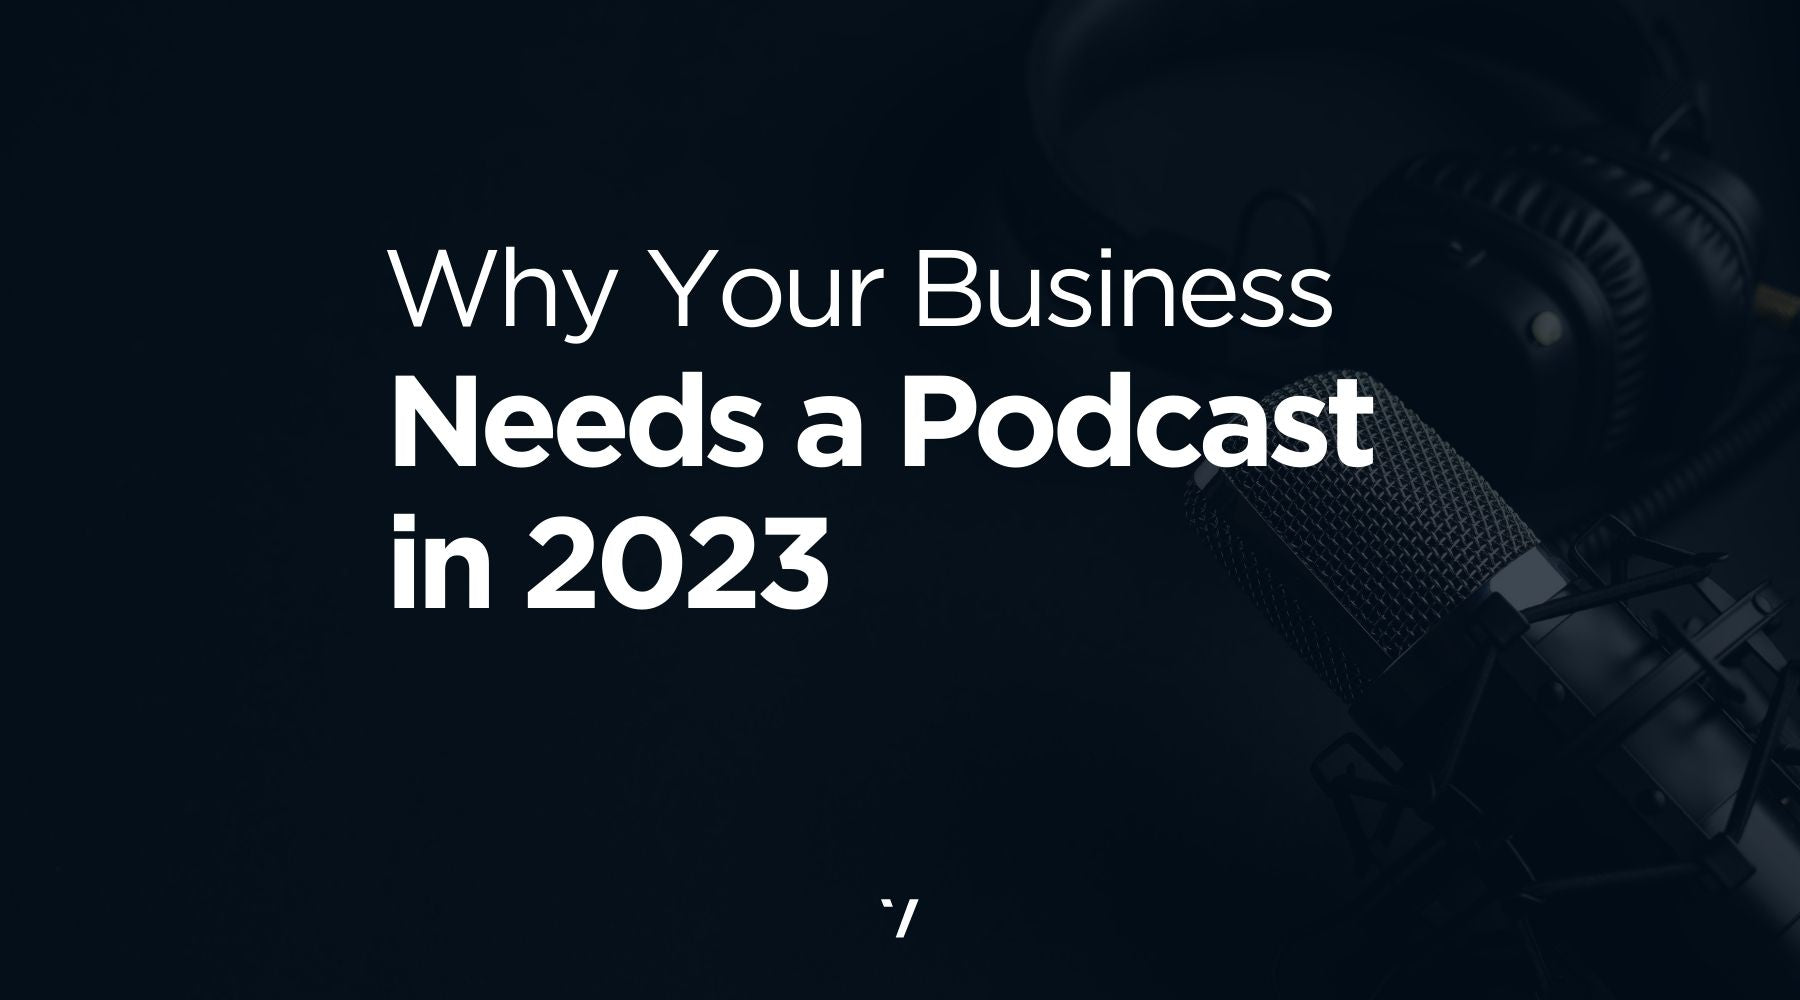 Why Your Business Needs Podcasting in 2023